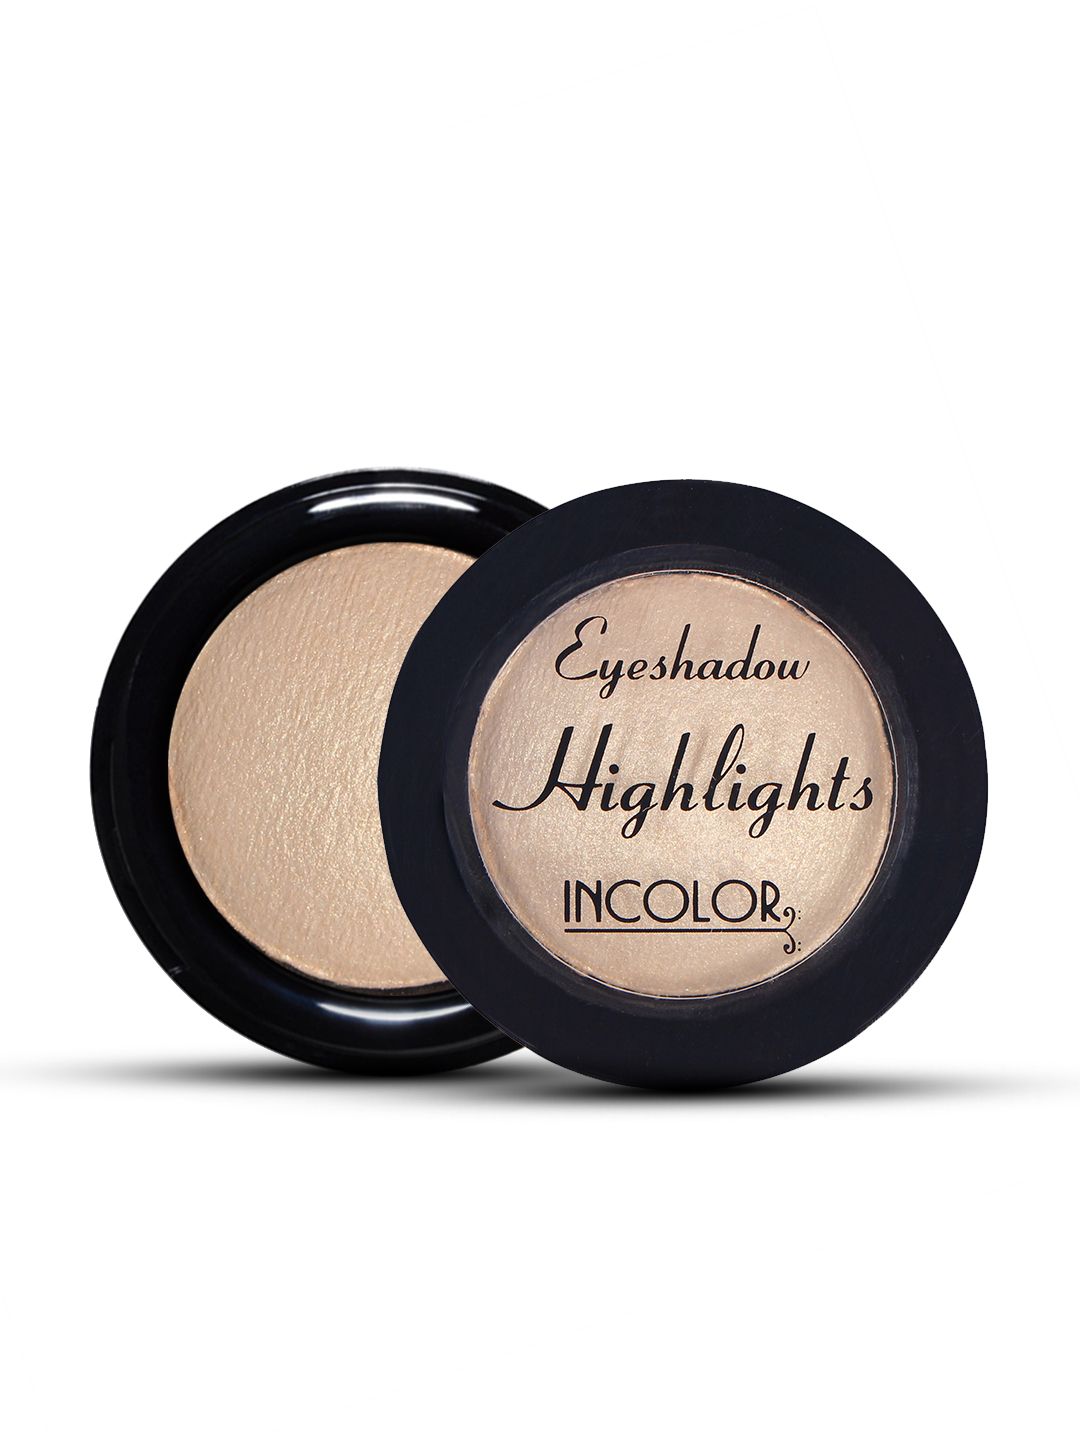 INCOLOR Off White Highlight Eyeshadow 17 4.5 gms Price in India